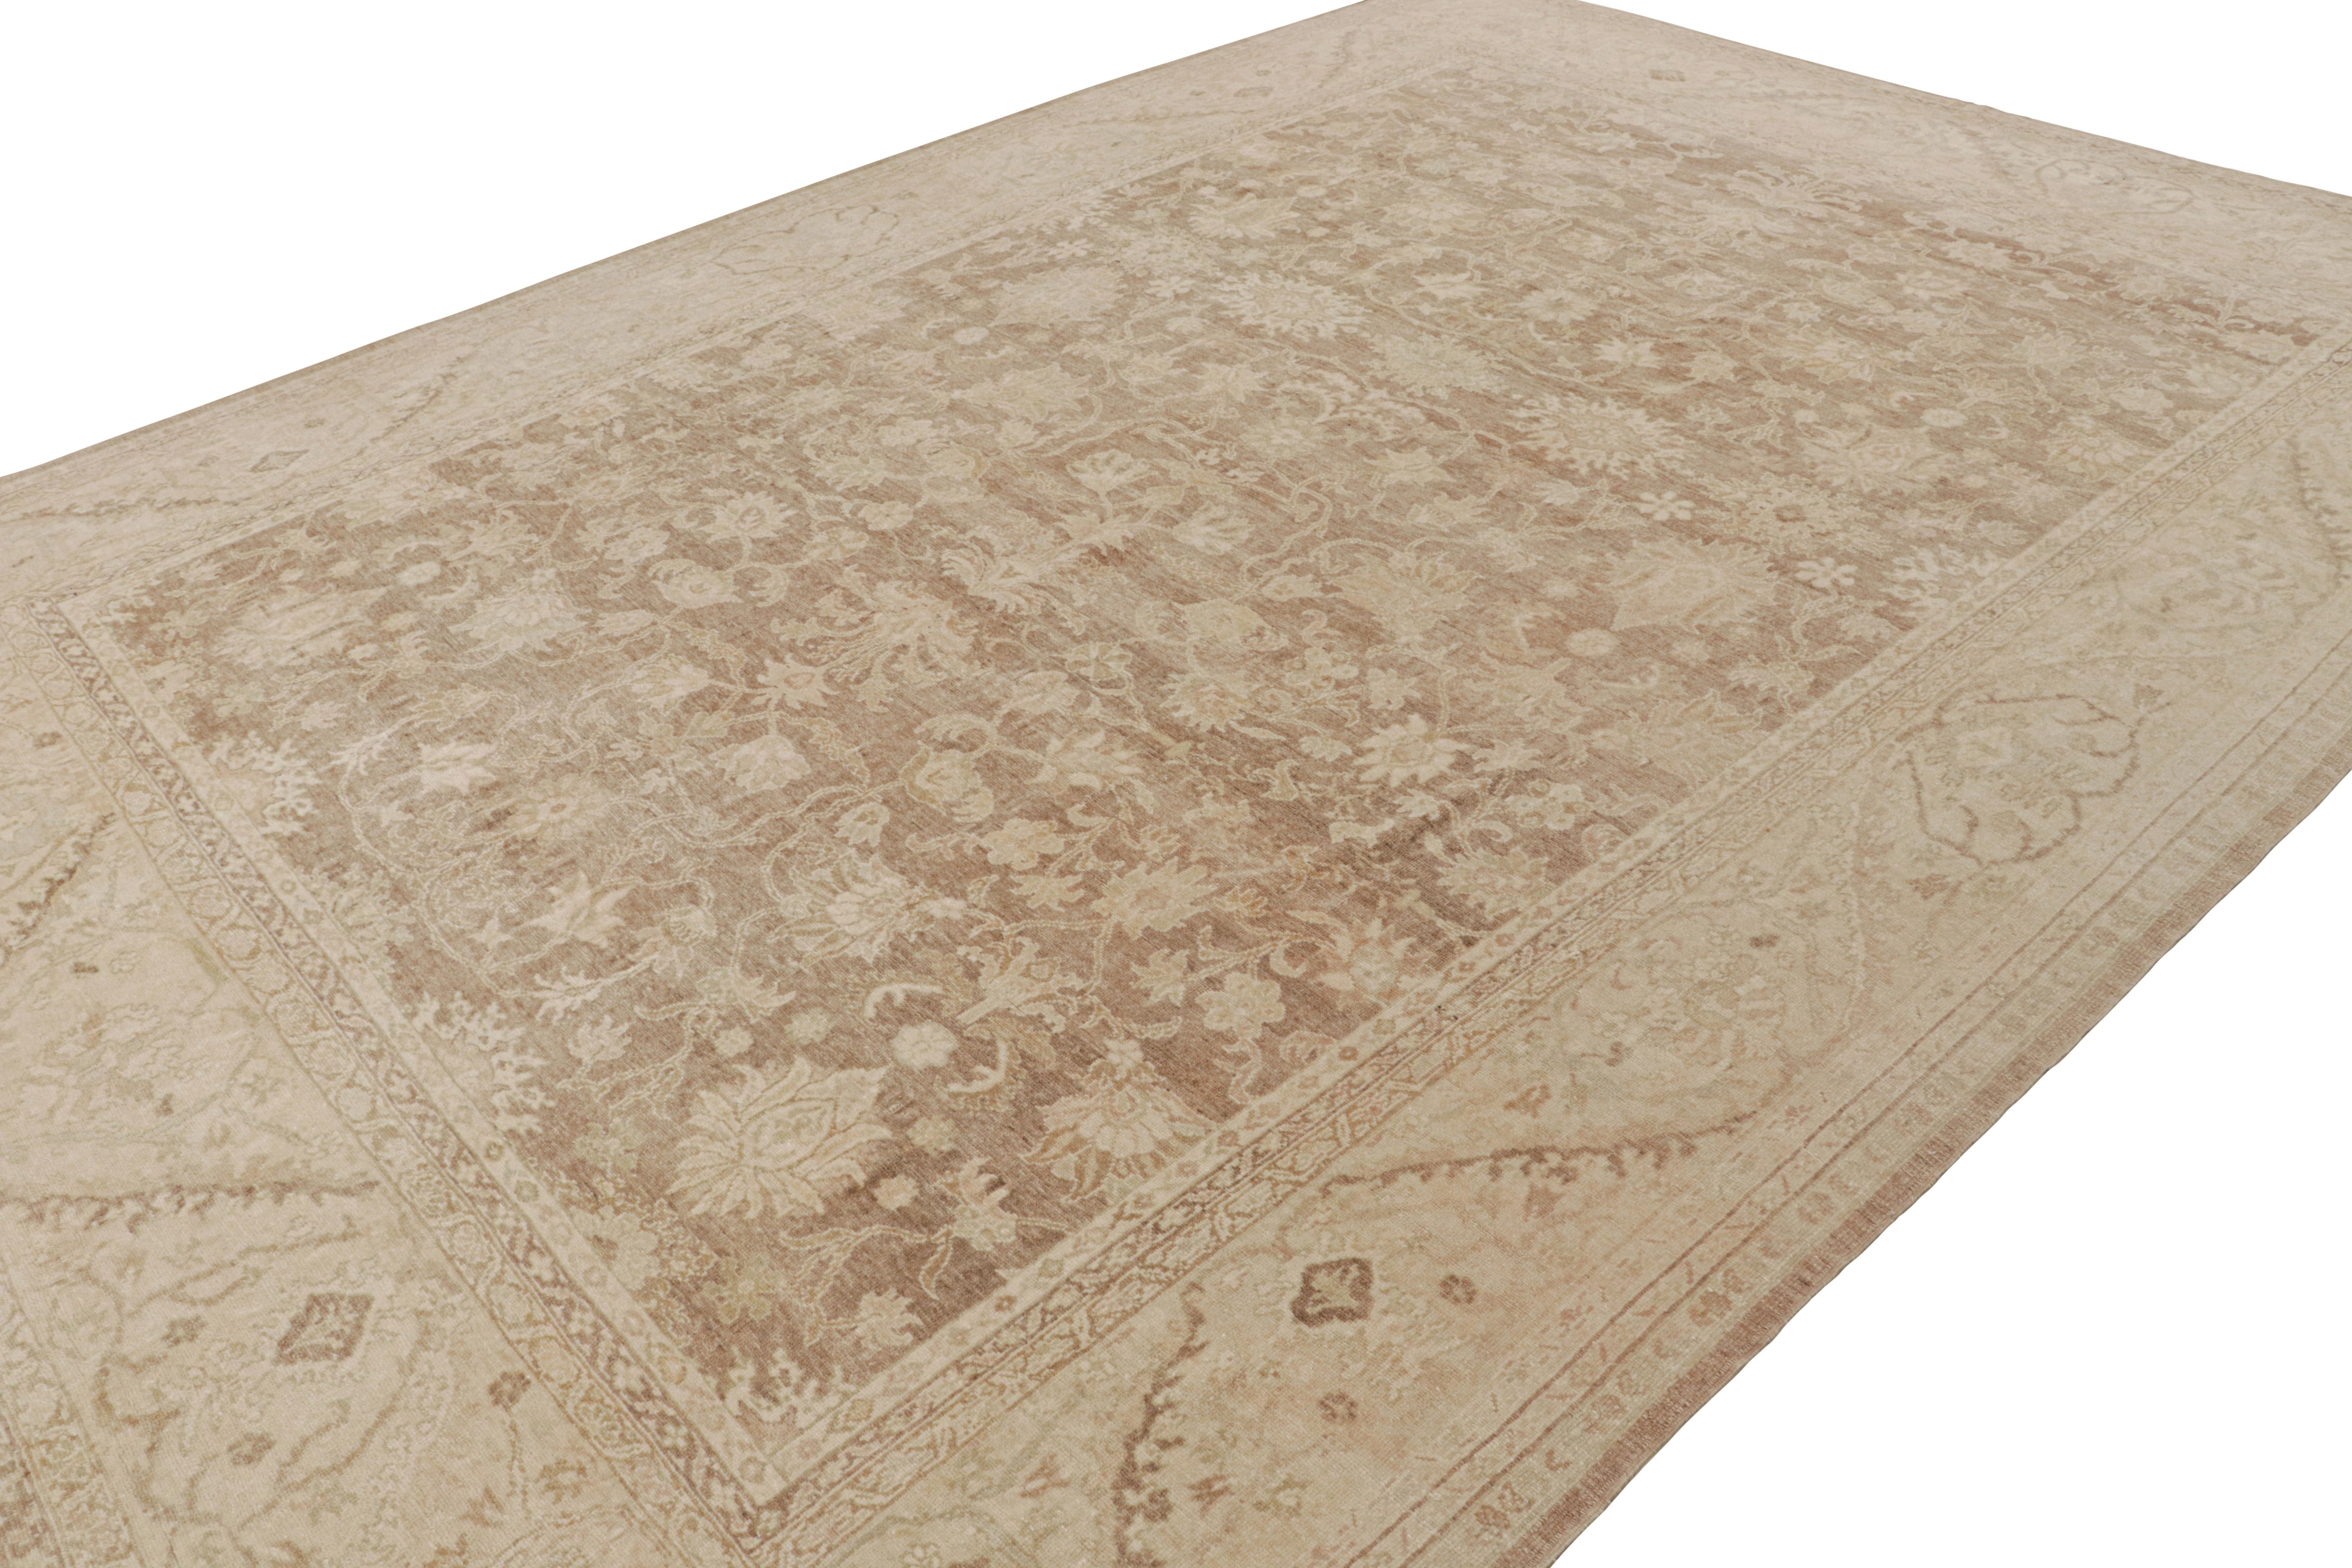 Hand-knotted in wool, this 10x14 vintage Persian Sultanabad rug in Beige-brown with taupe tones, features intricate floral patterns with a slight European sensibility to them.  

On the design: 

Drawing inspiration from the fine European